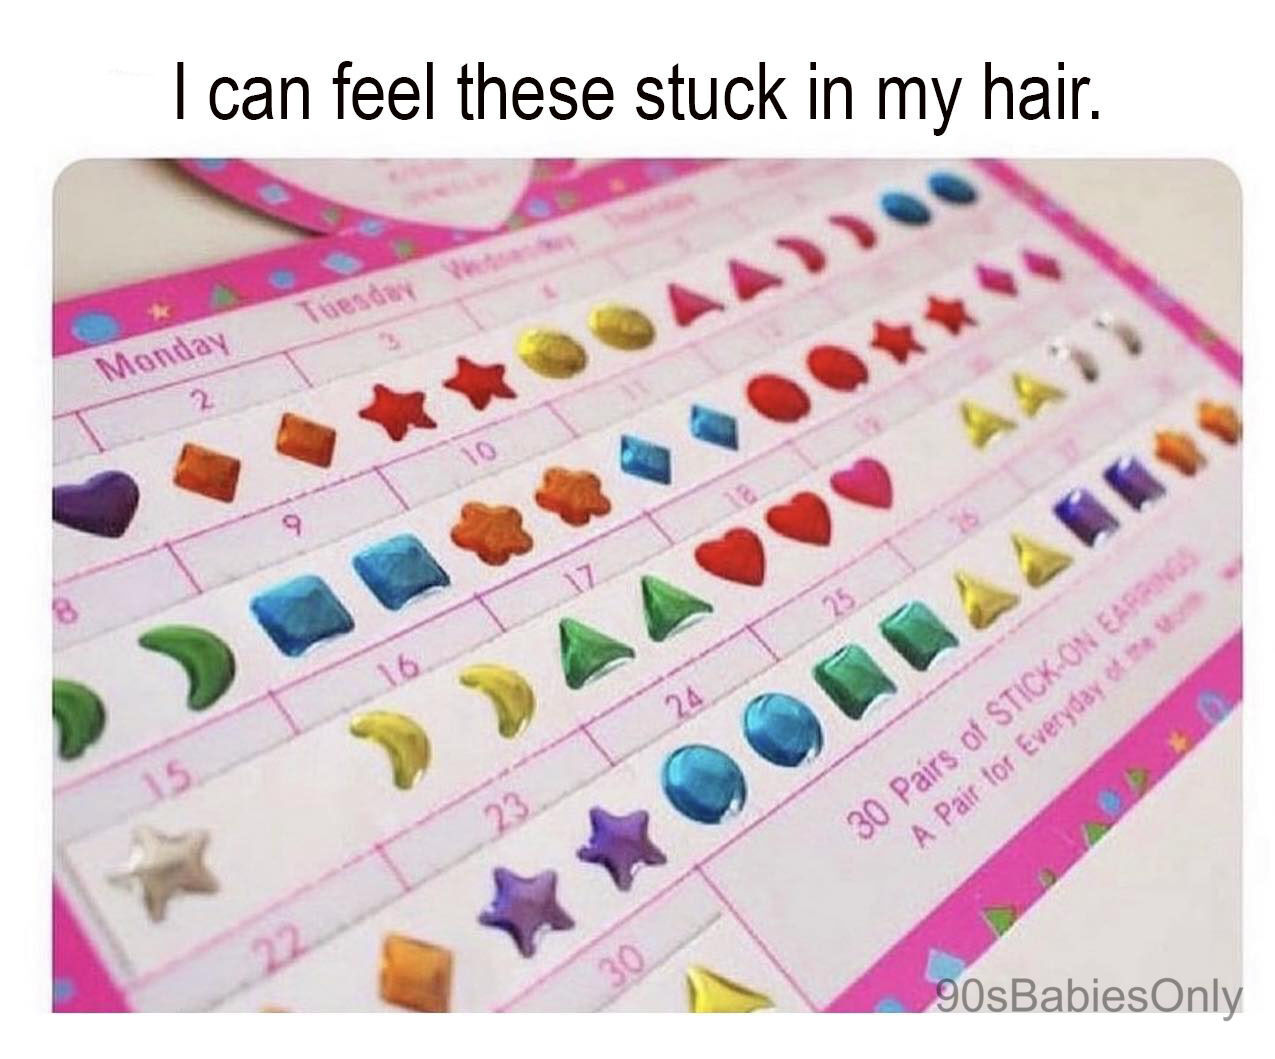 Pack of stick-on earrings in various colors and shapes like squares, circles, moons, hearts, etc.

Text above image: I can feel these stuck in my hair